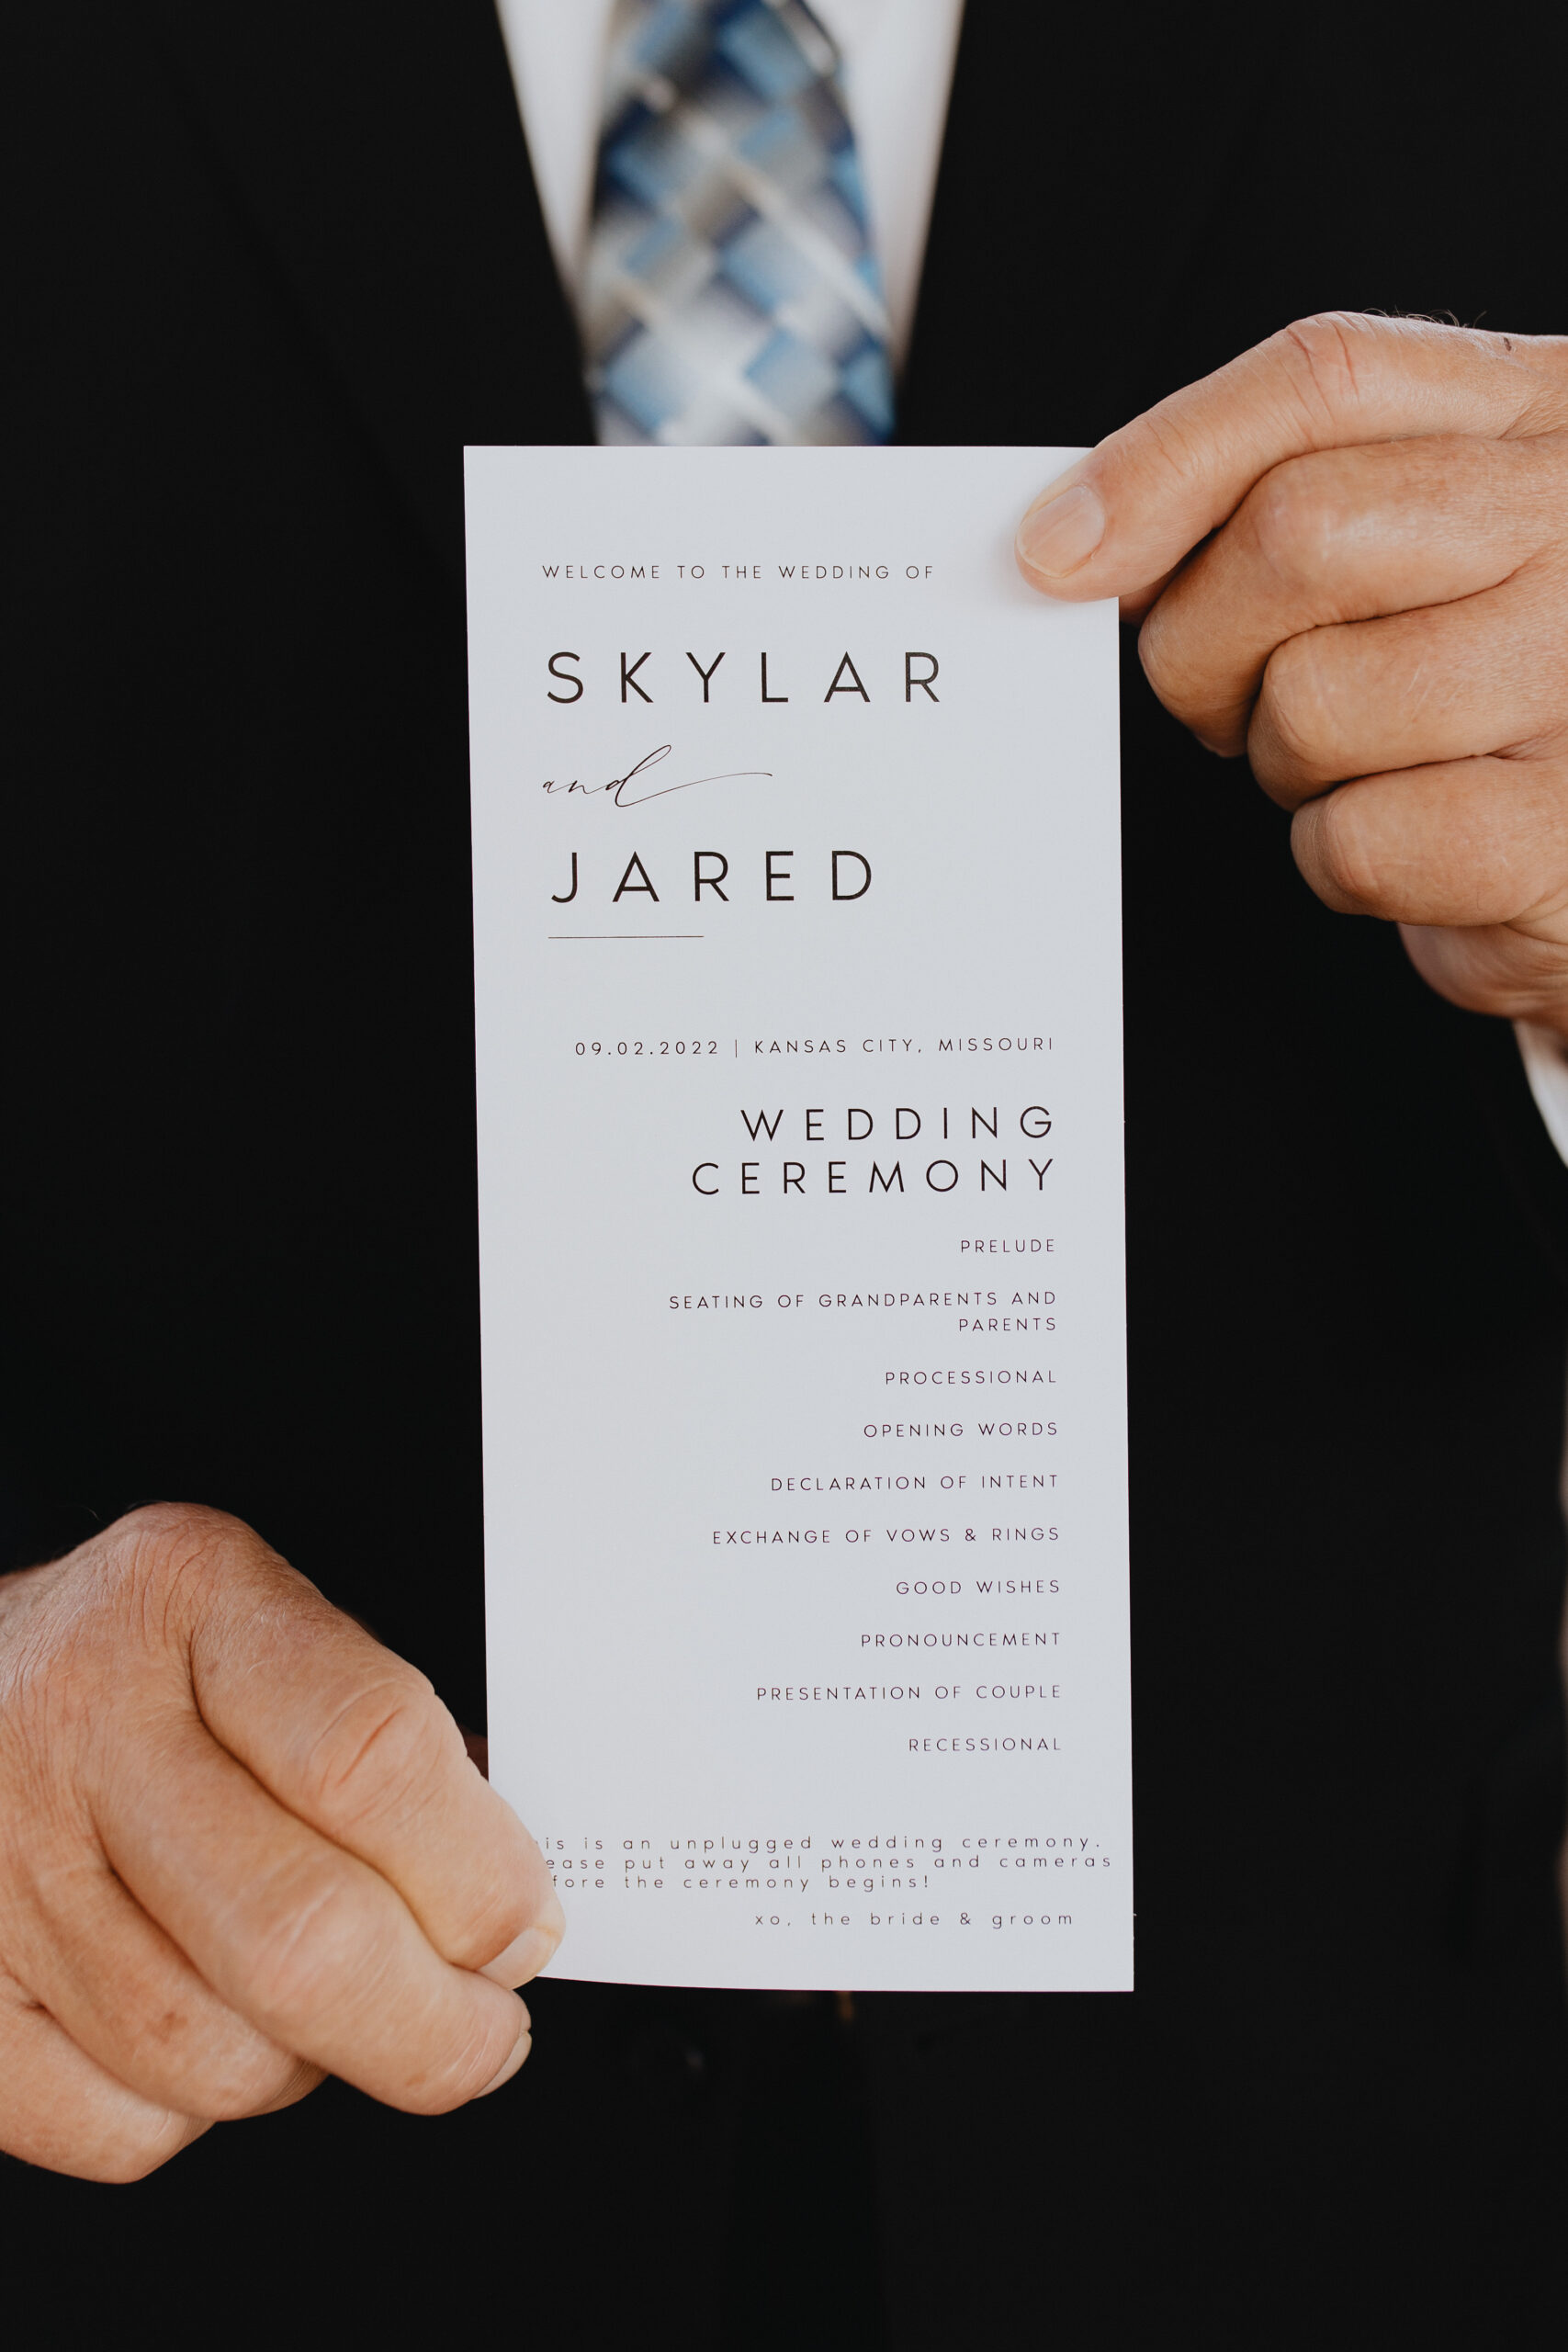 A Colorful and Romantic Skyline Wedding in Kansas City